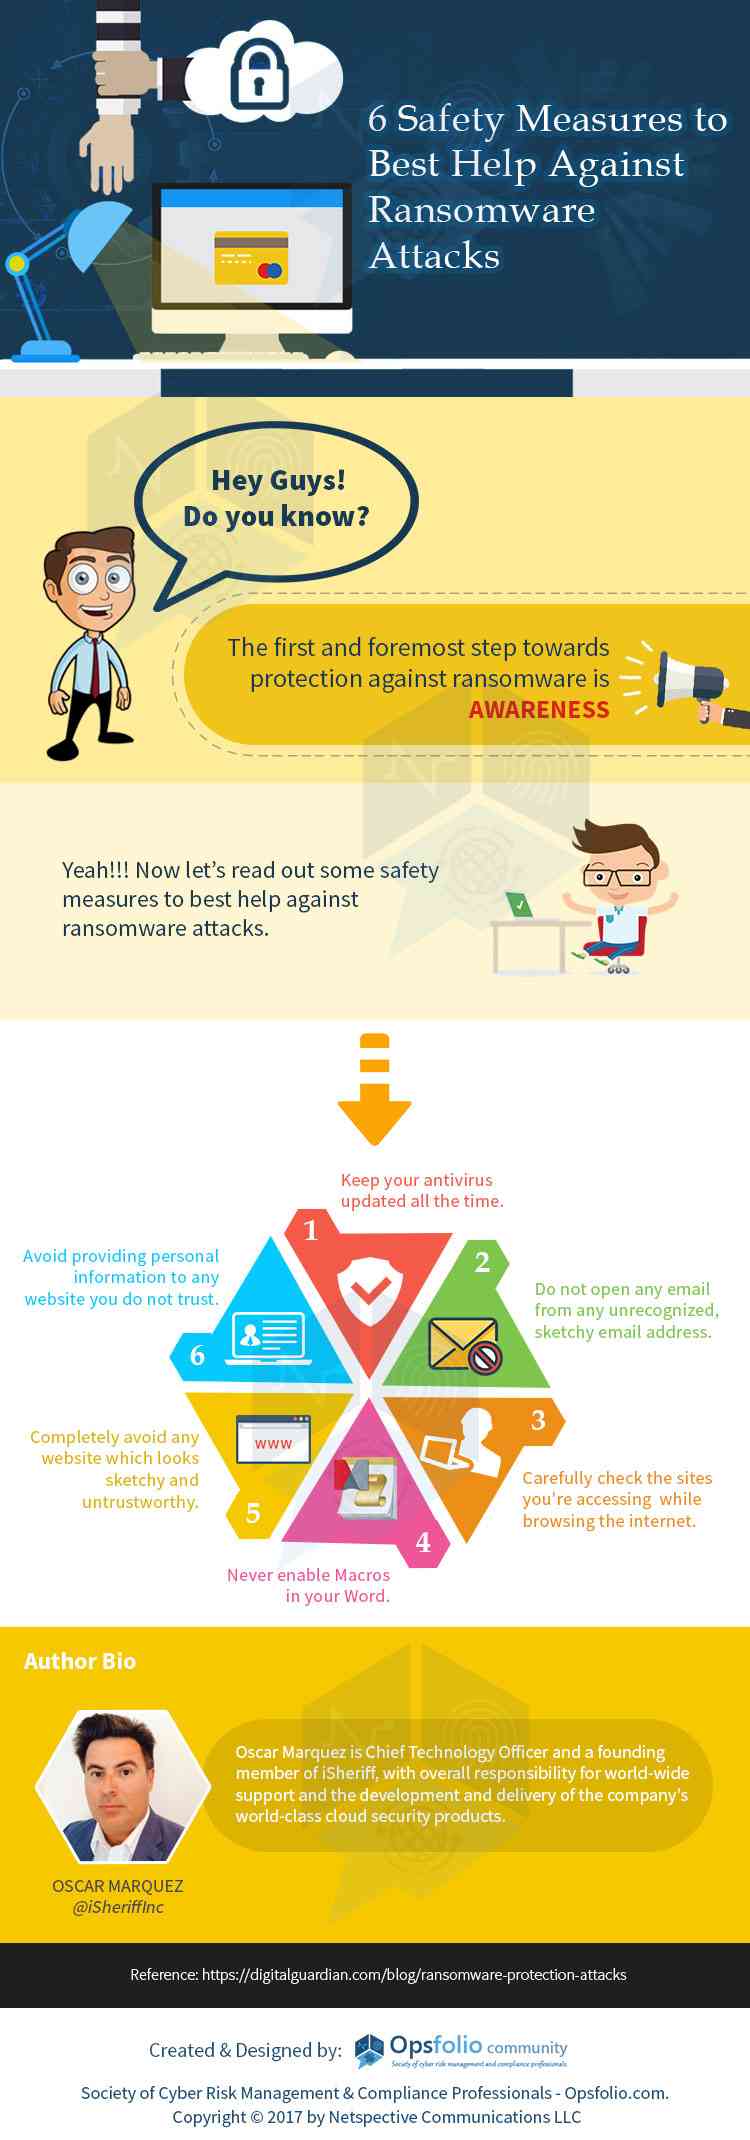 6 Safety Measures to Help Best Against Ransomware Attacks